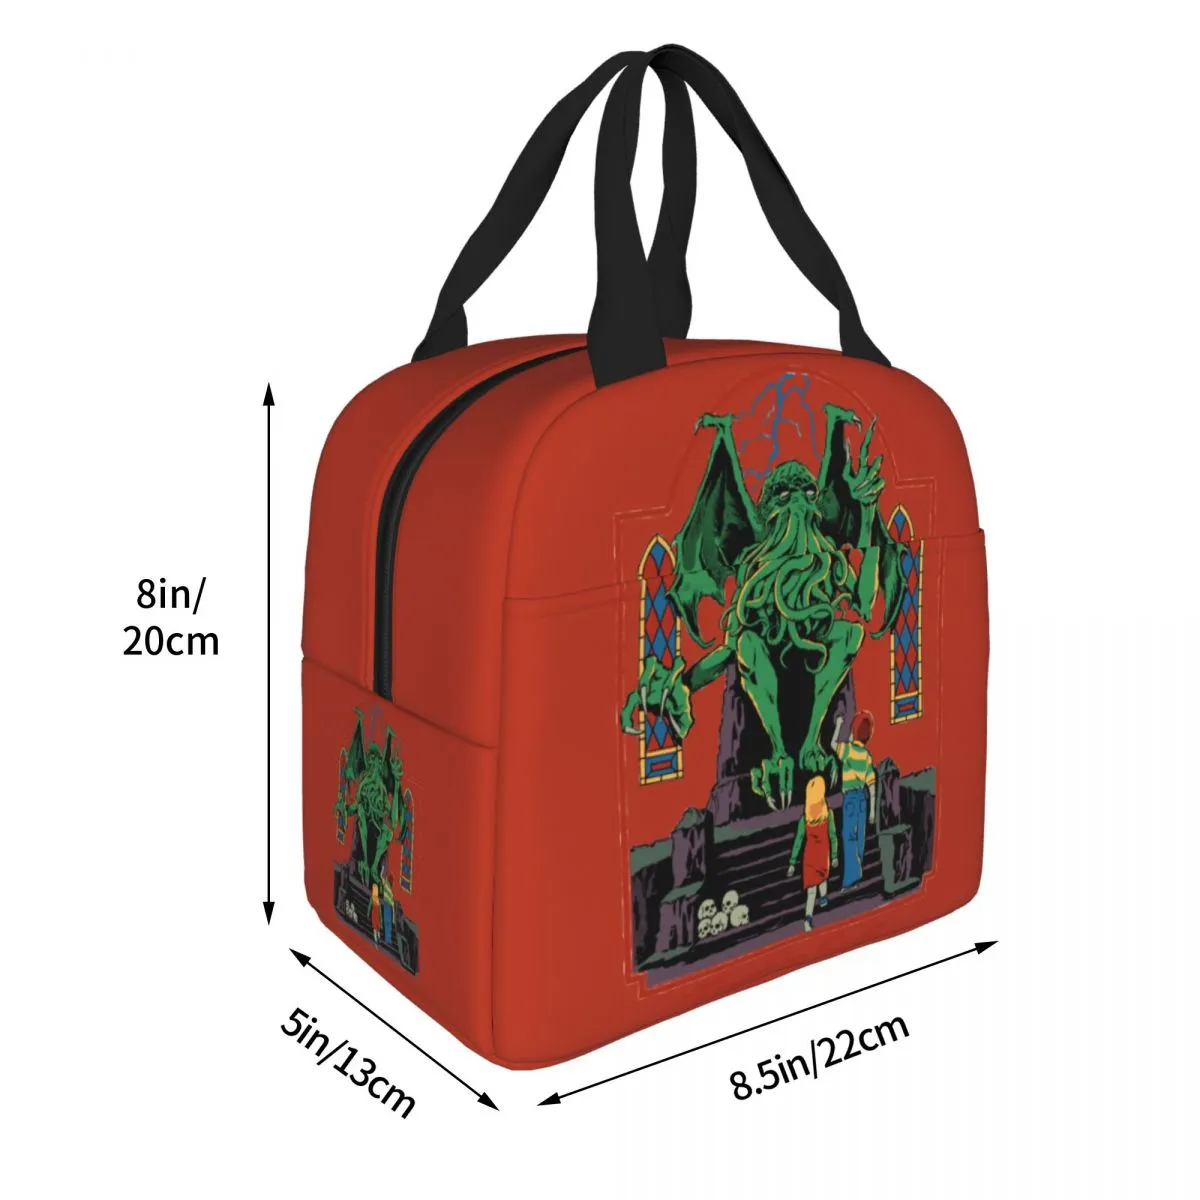 Trust In God Insulated Lunch Bags Cooler Bag Lunch Container Horror Halloween Retro Cthulhu Lovecraft Occult Tote Lunch Box